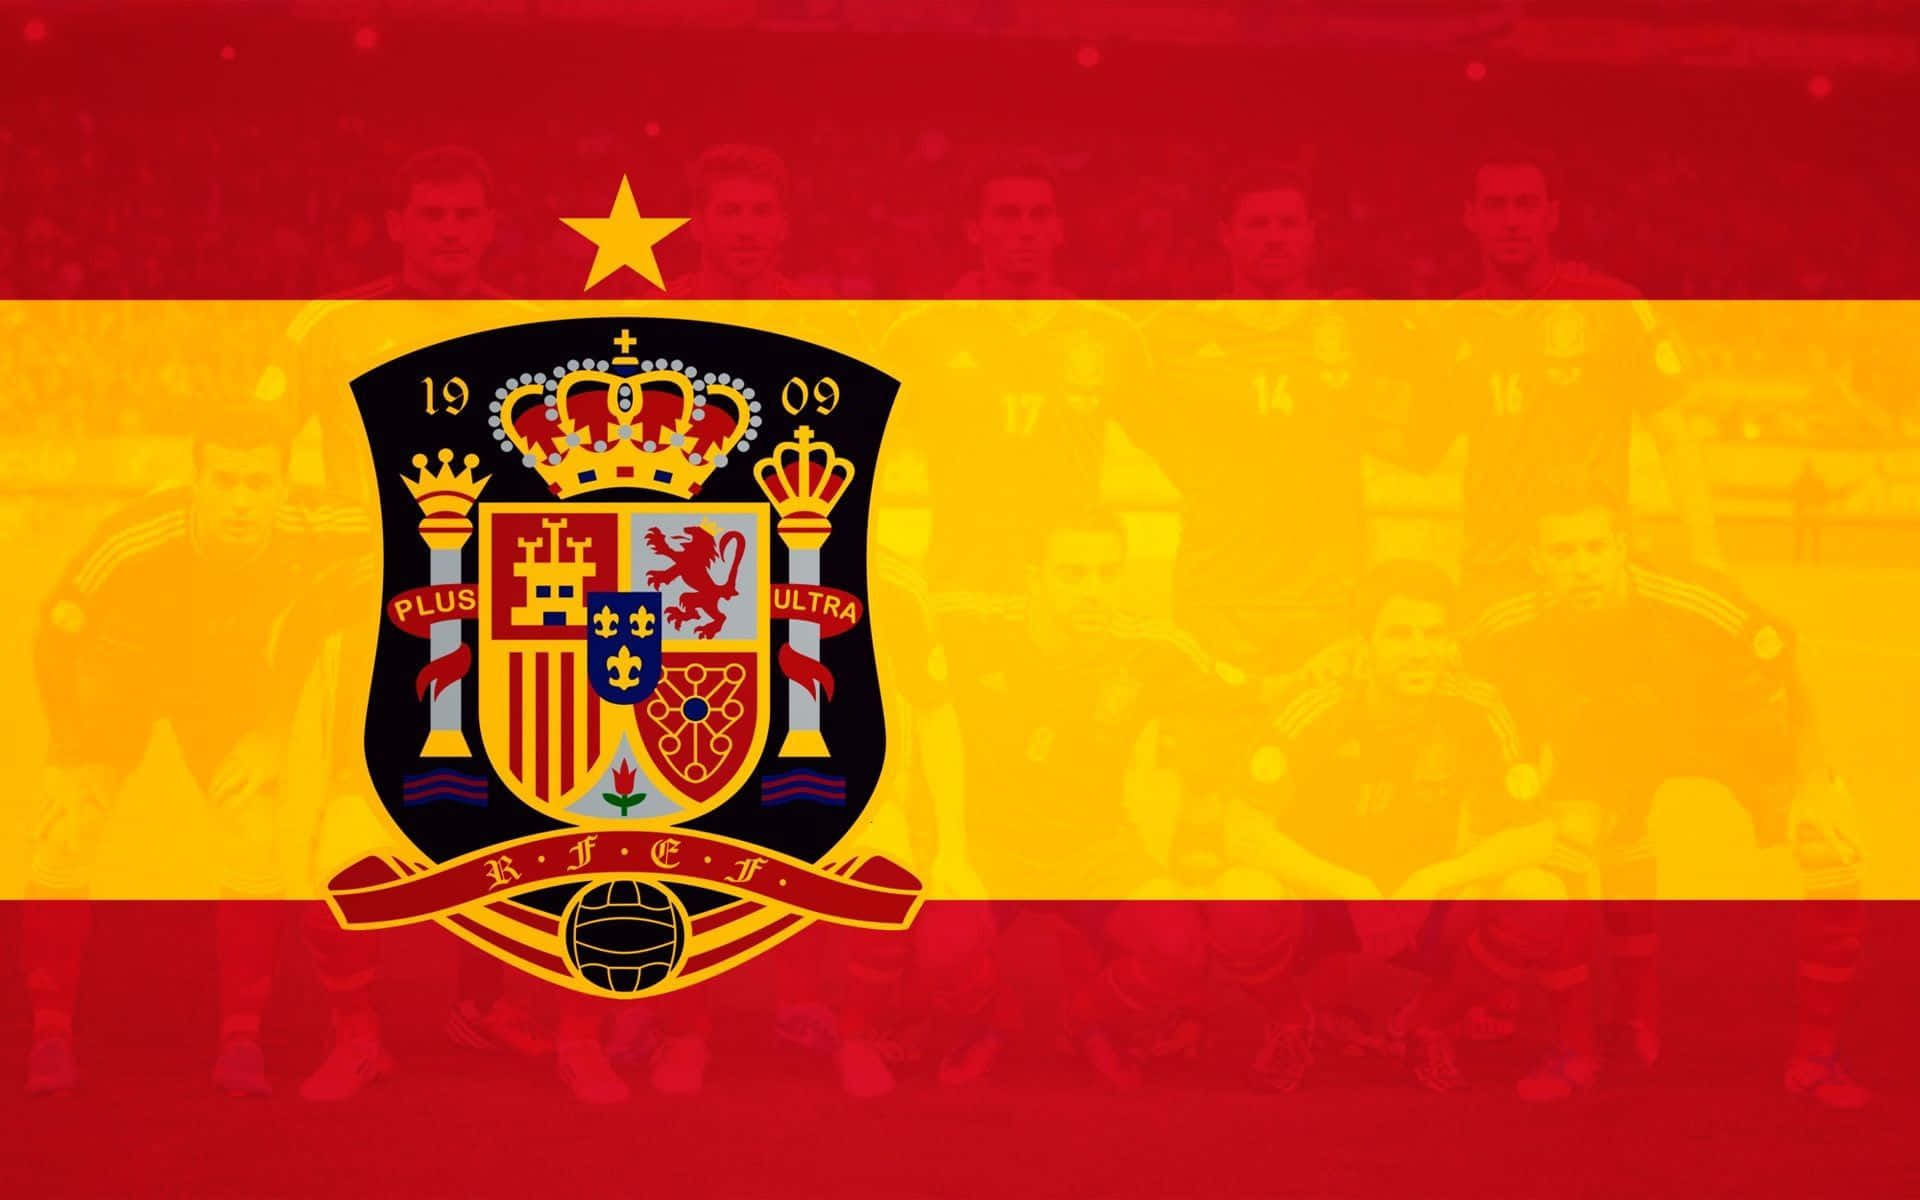 The Spanish Flag Is Shown In The Background Wallpaper